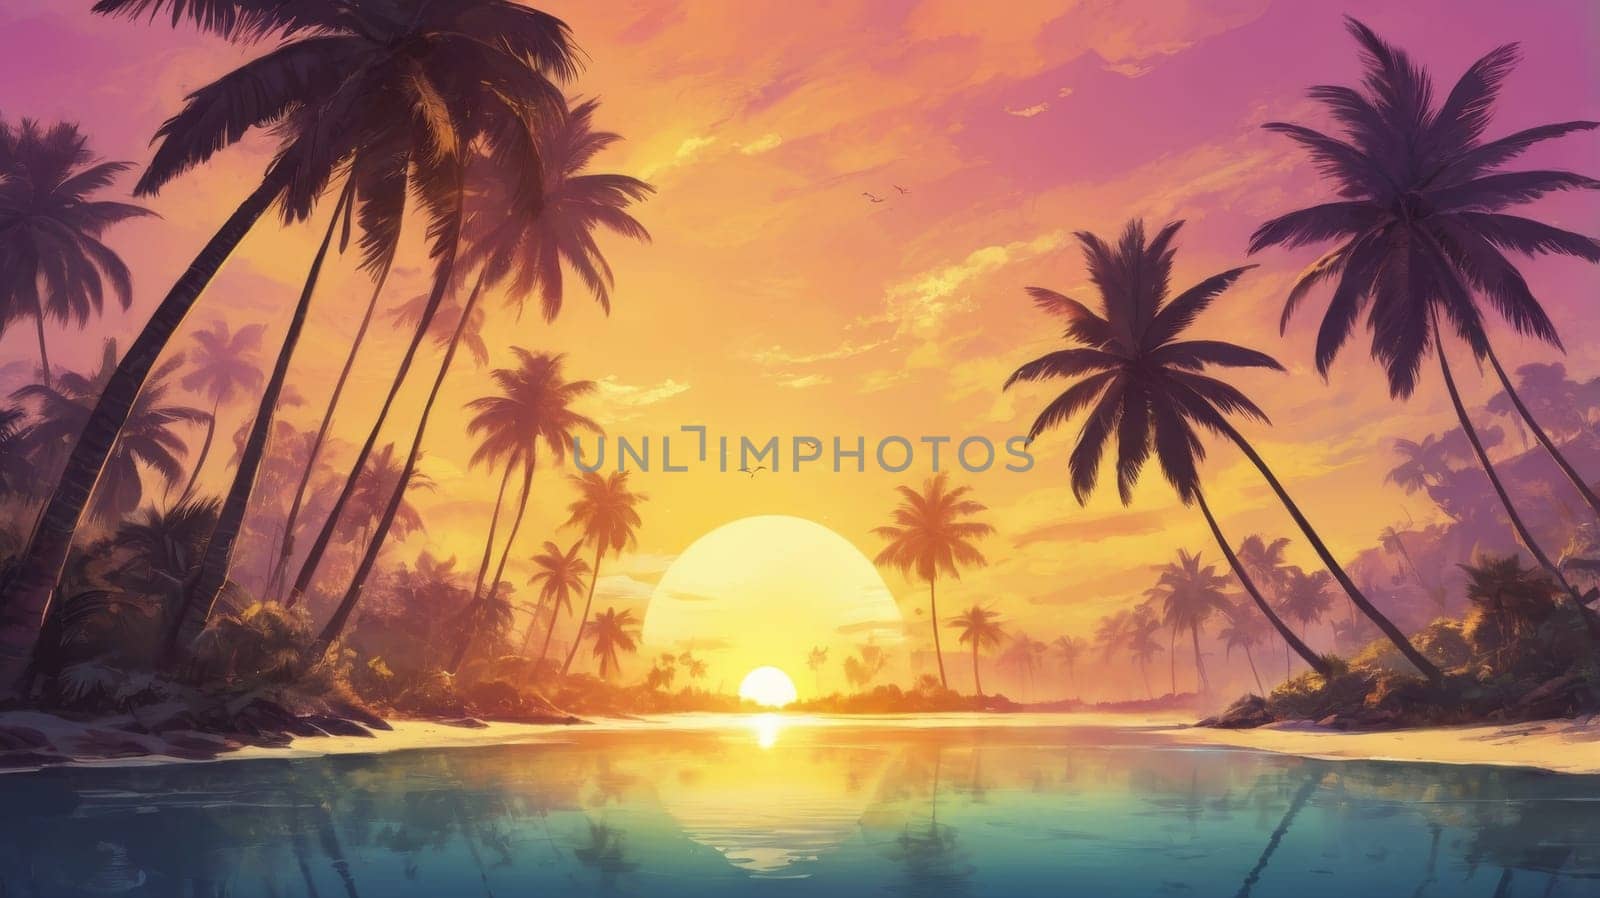 Landscape of paradise tropical island beach, sunrise sunset view. Exotic scenery, palm trees, soft sand and calm sea. Summer beach landscape, vacation or tropical travel sunset colors clouds horizon.